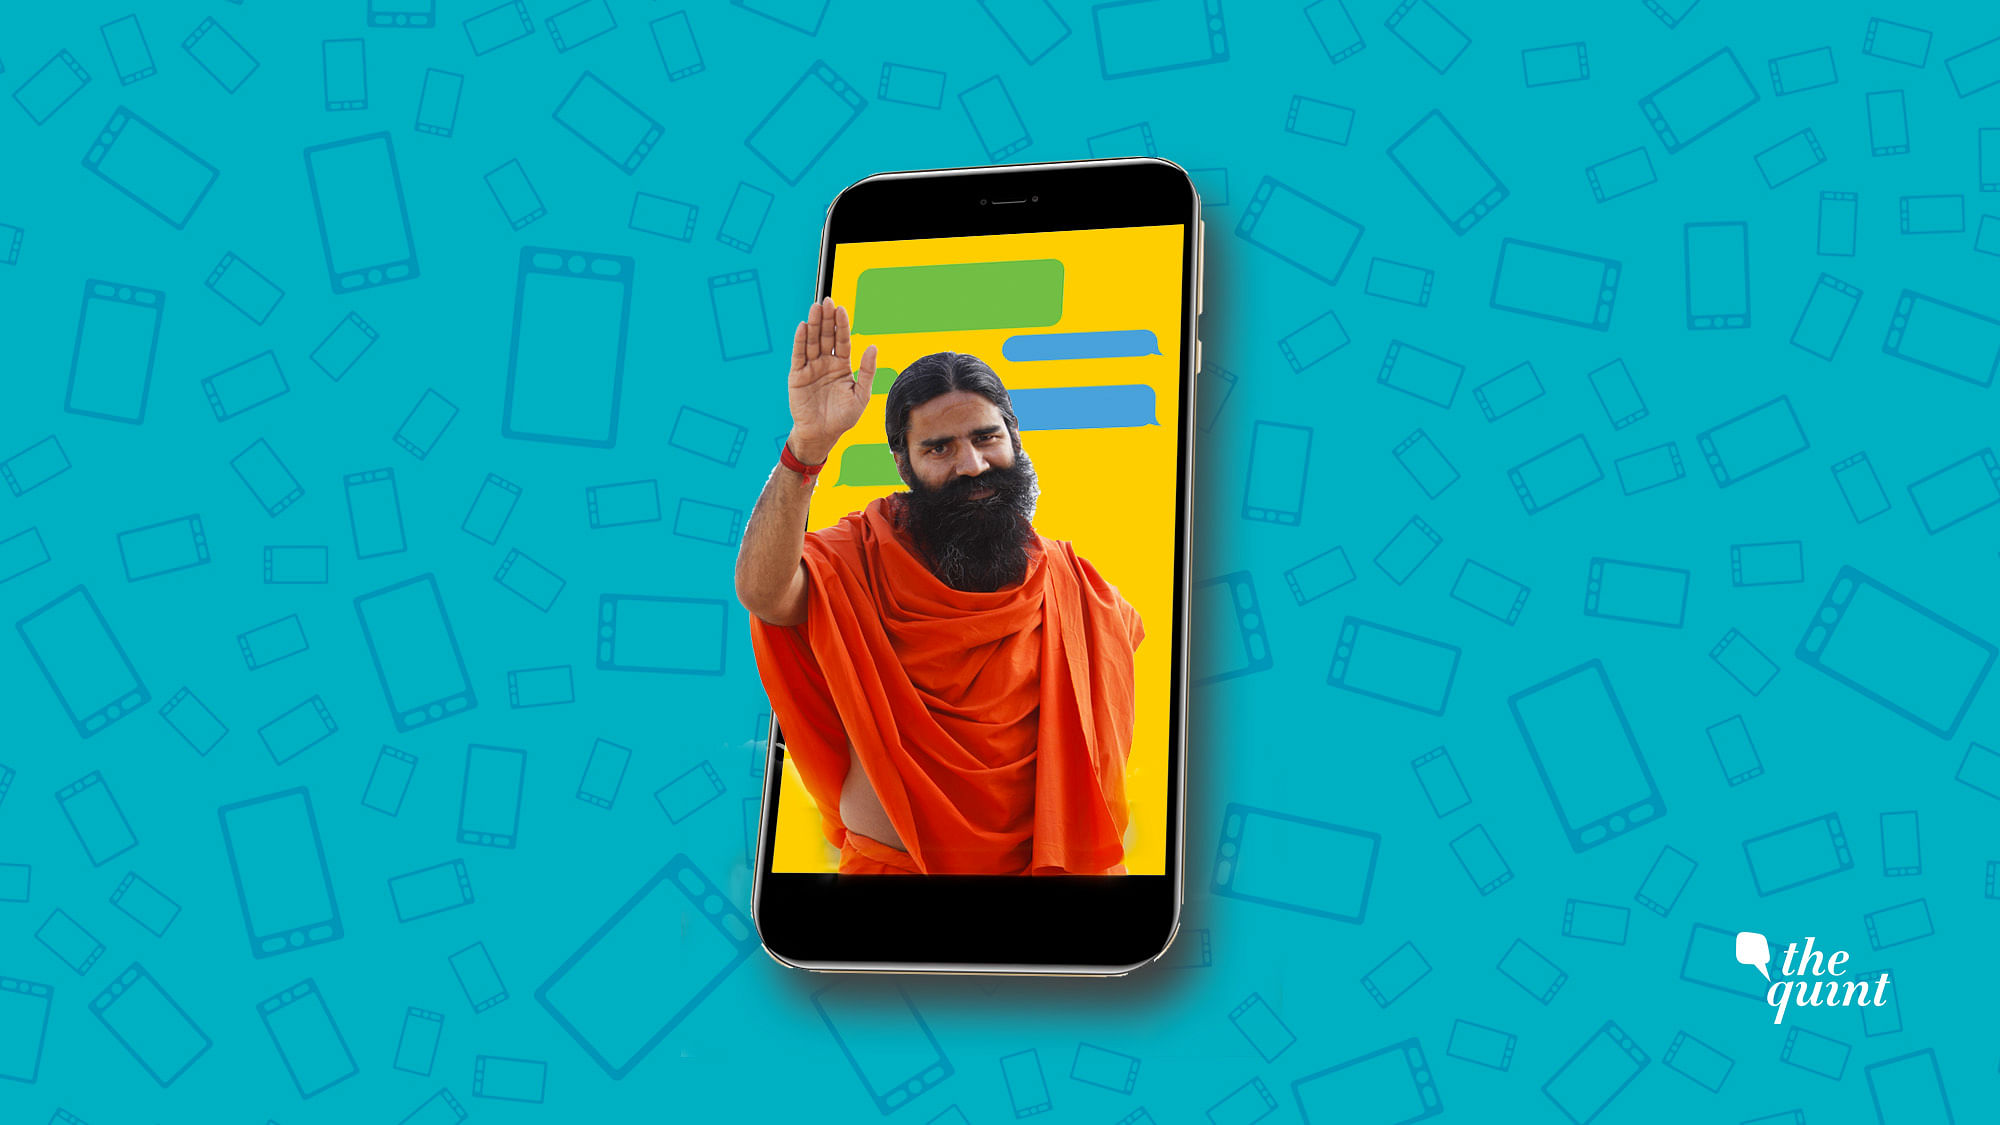 Baba Ramdev has launched a WhatsApp rival messaging app, ‘Kimbho’. What goes on inside? Take a look.